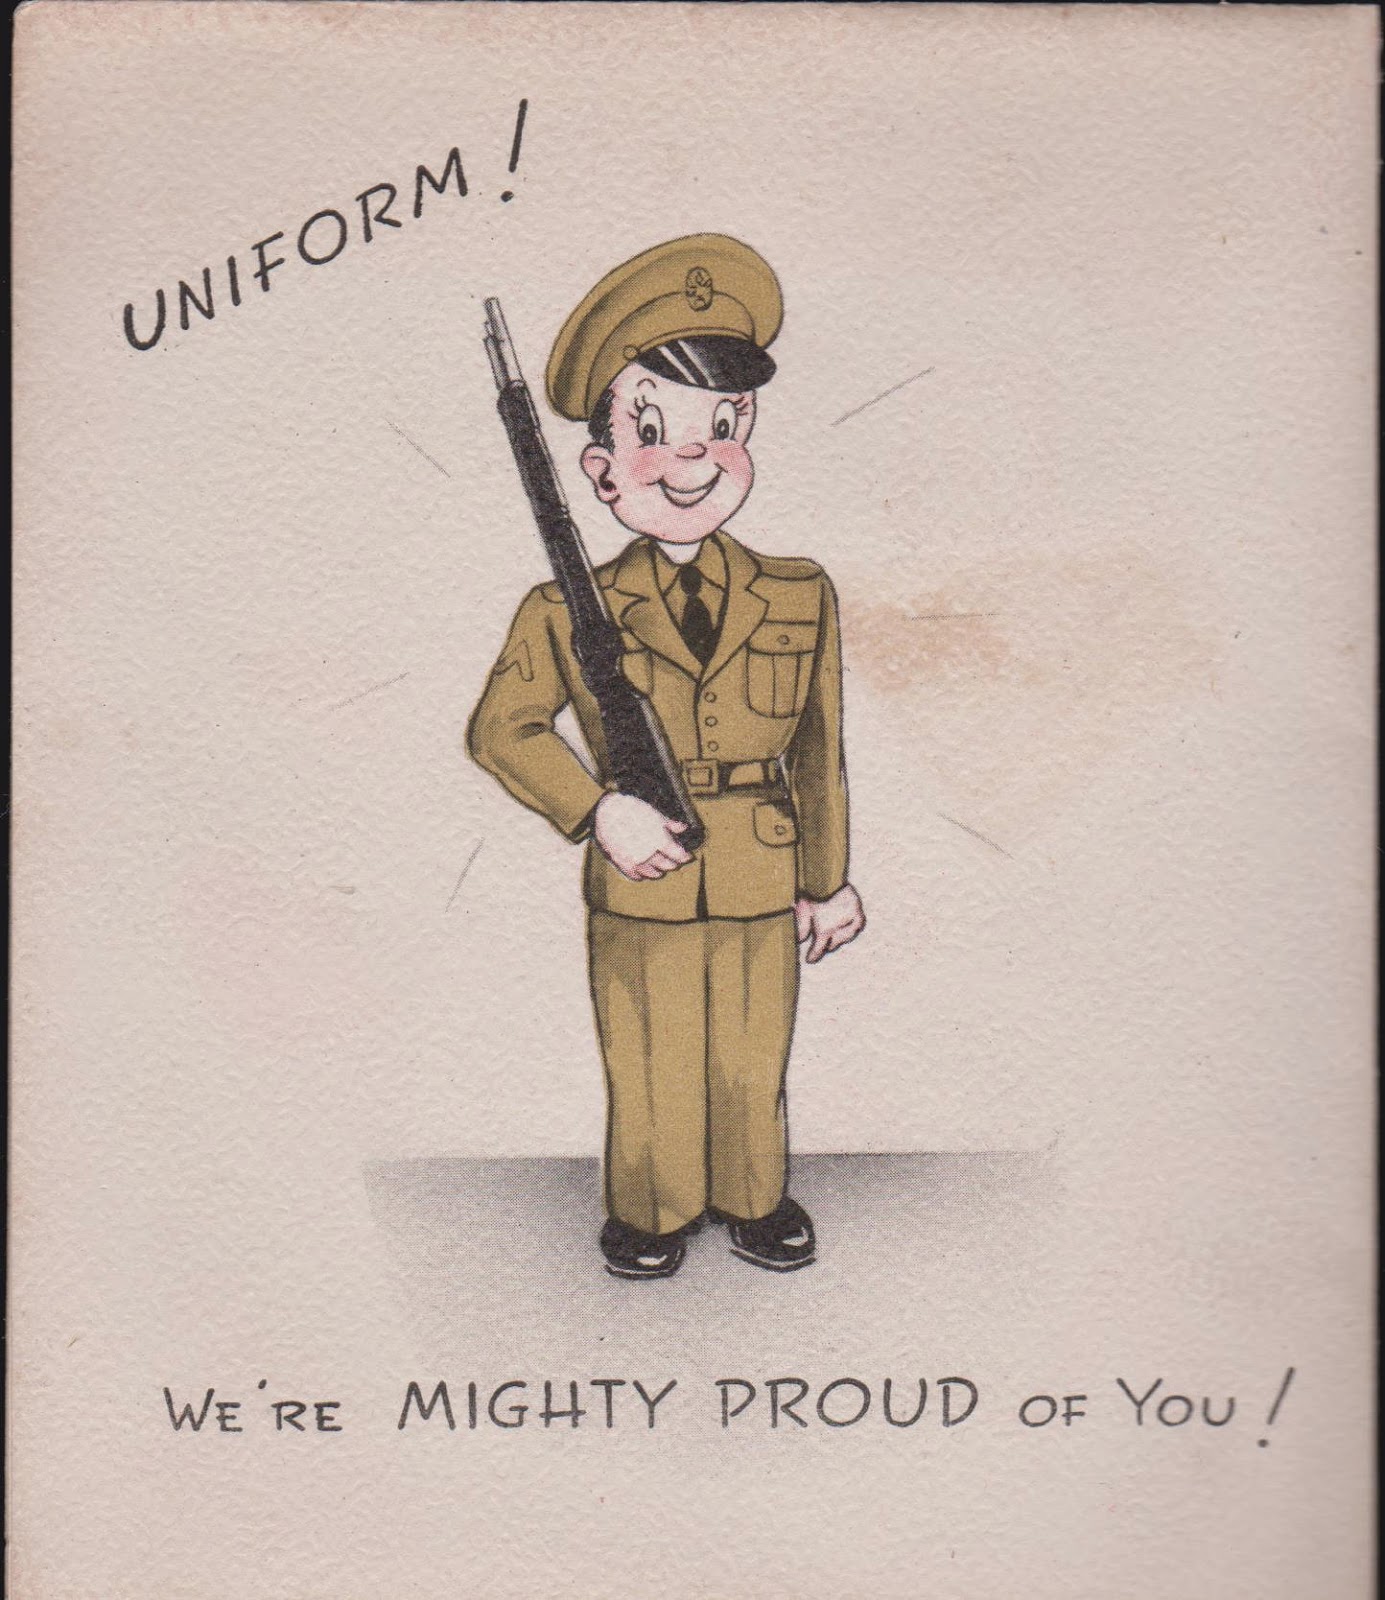 vintage-recycling-1940s-wwii-greeting-cards-for-soldiers